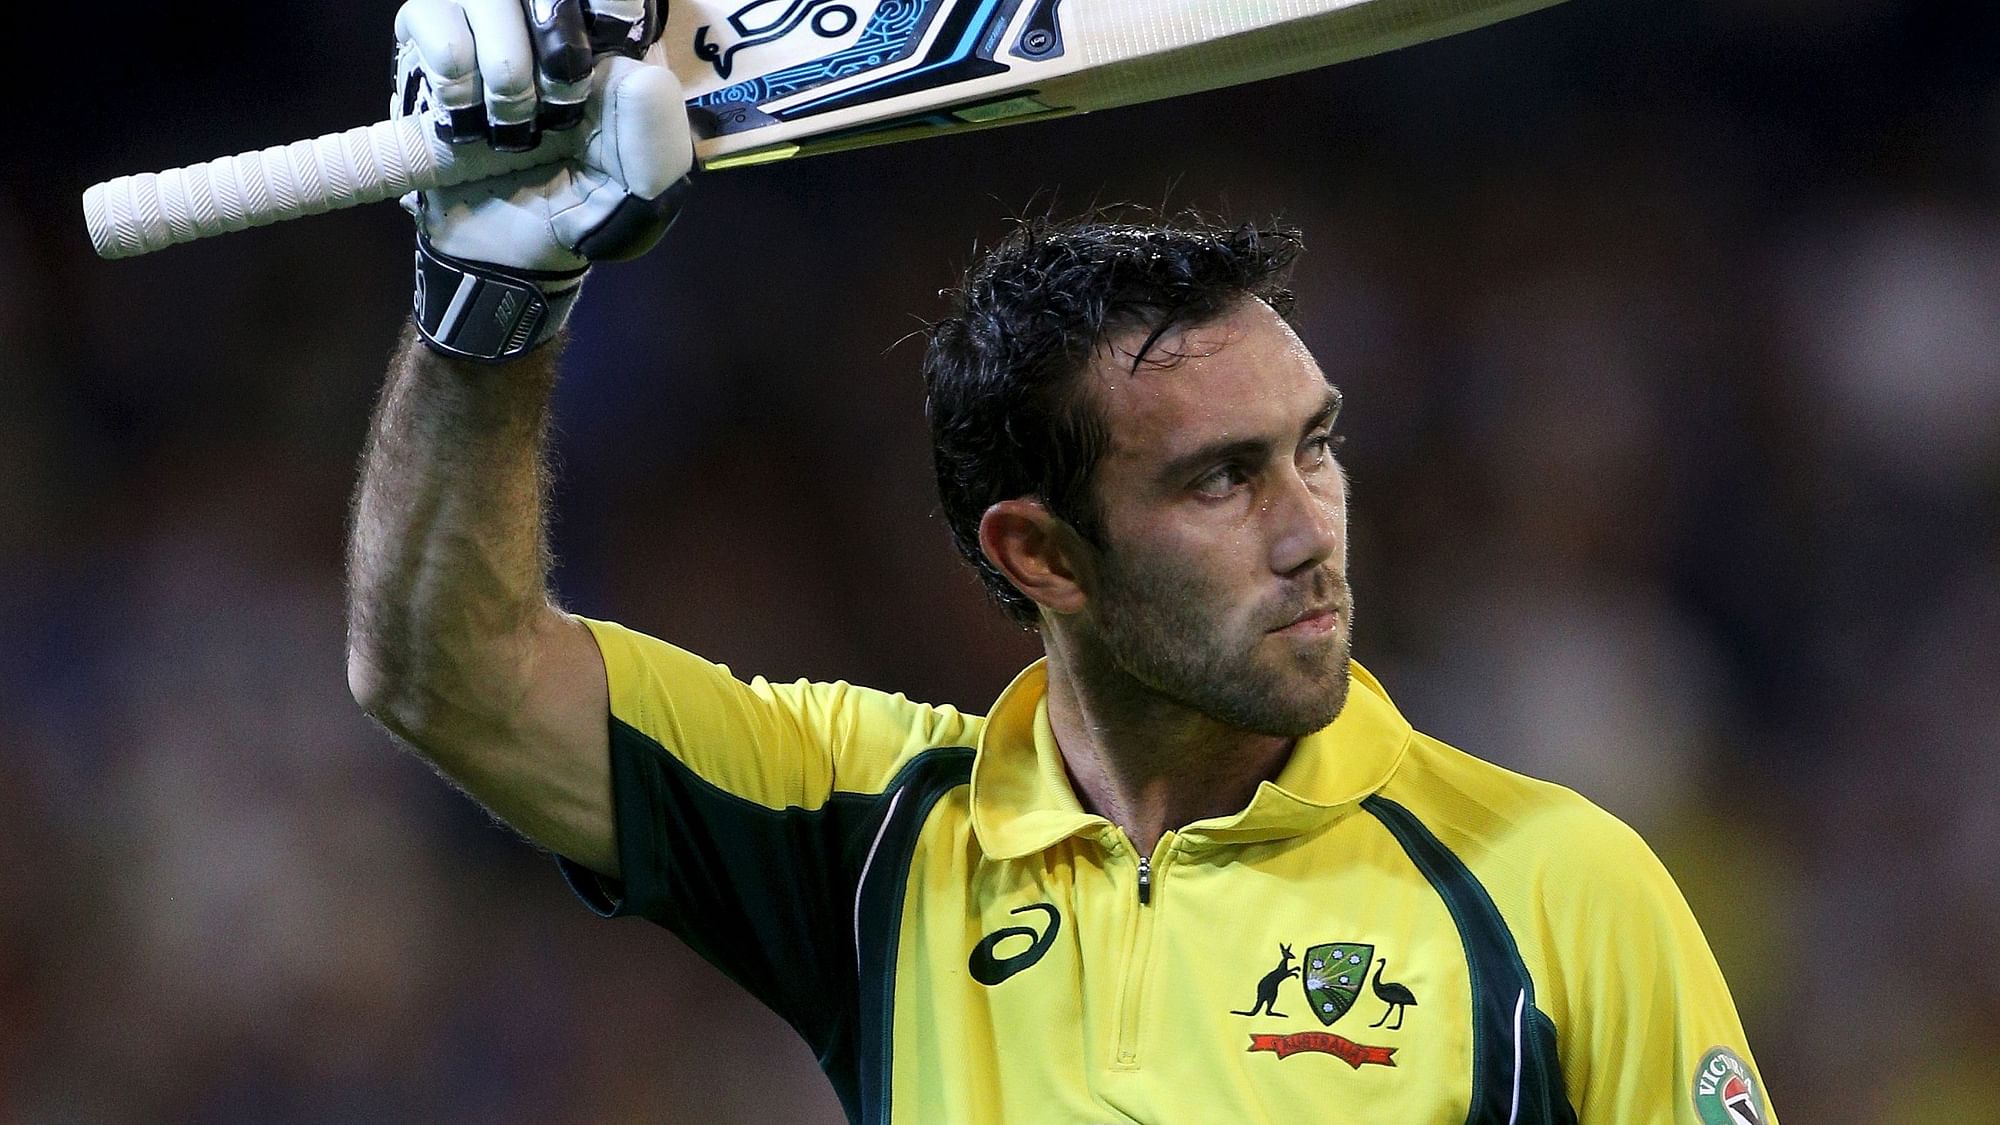 Glenn Maxwell on Friday smashed a scintillating 83 off 39 balls for Melbourne Stars in the Big Bash League.